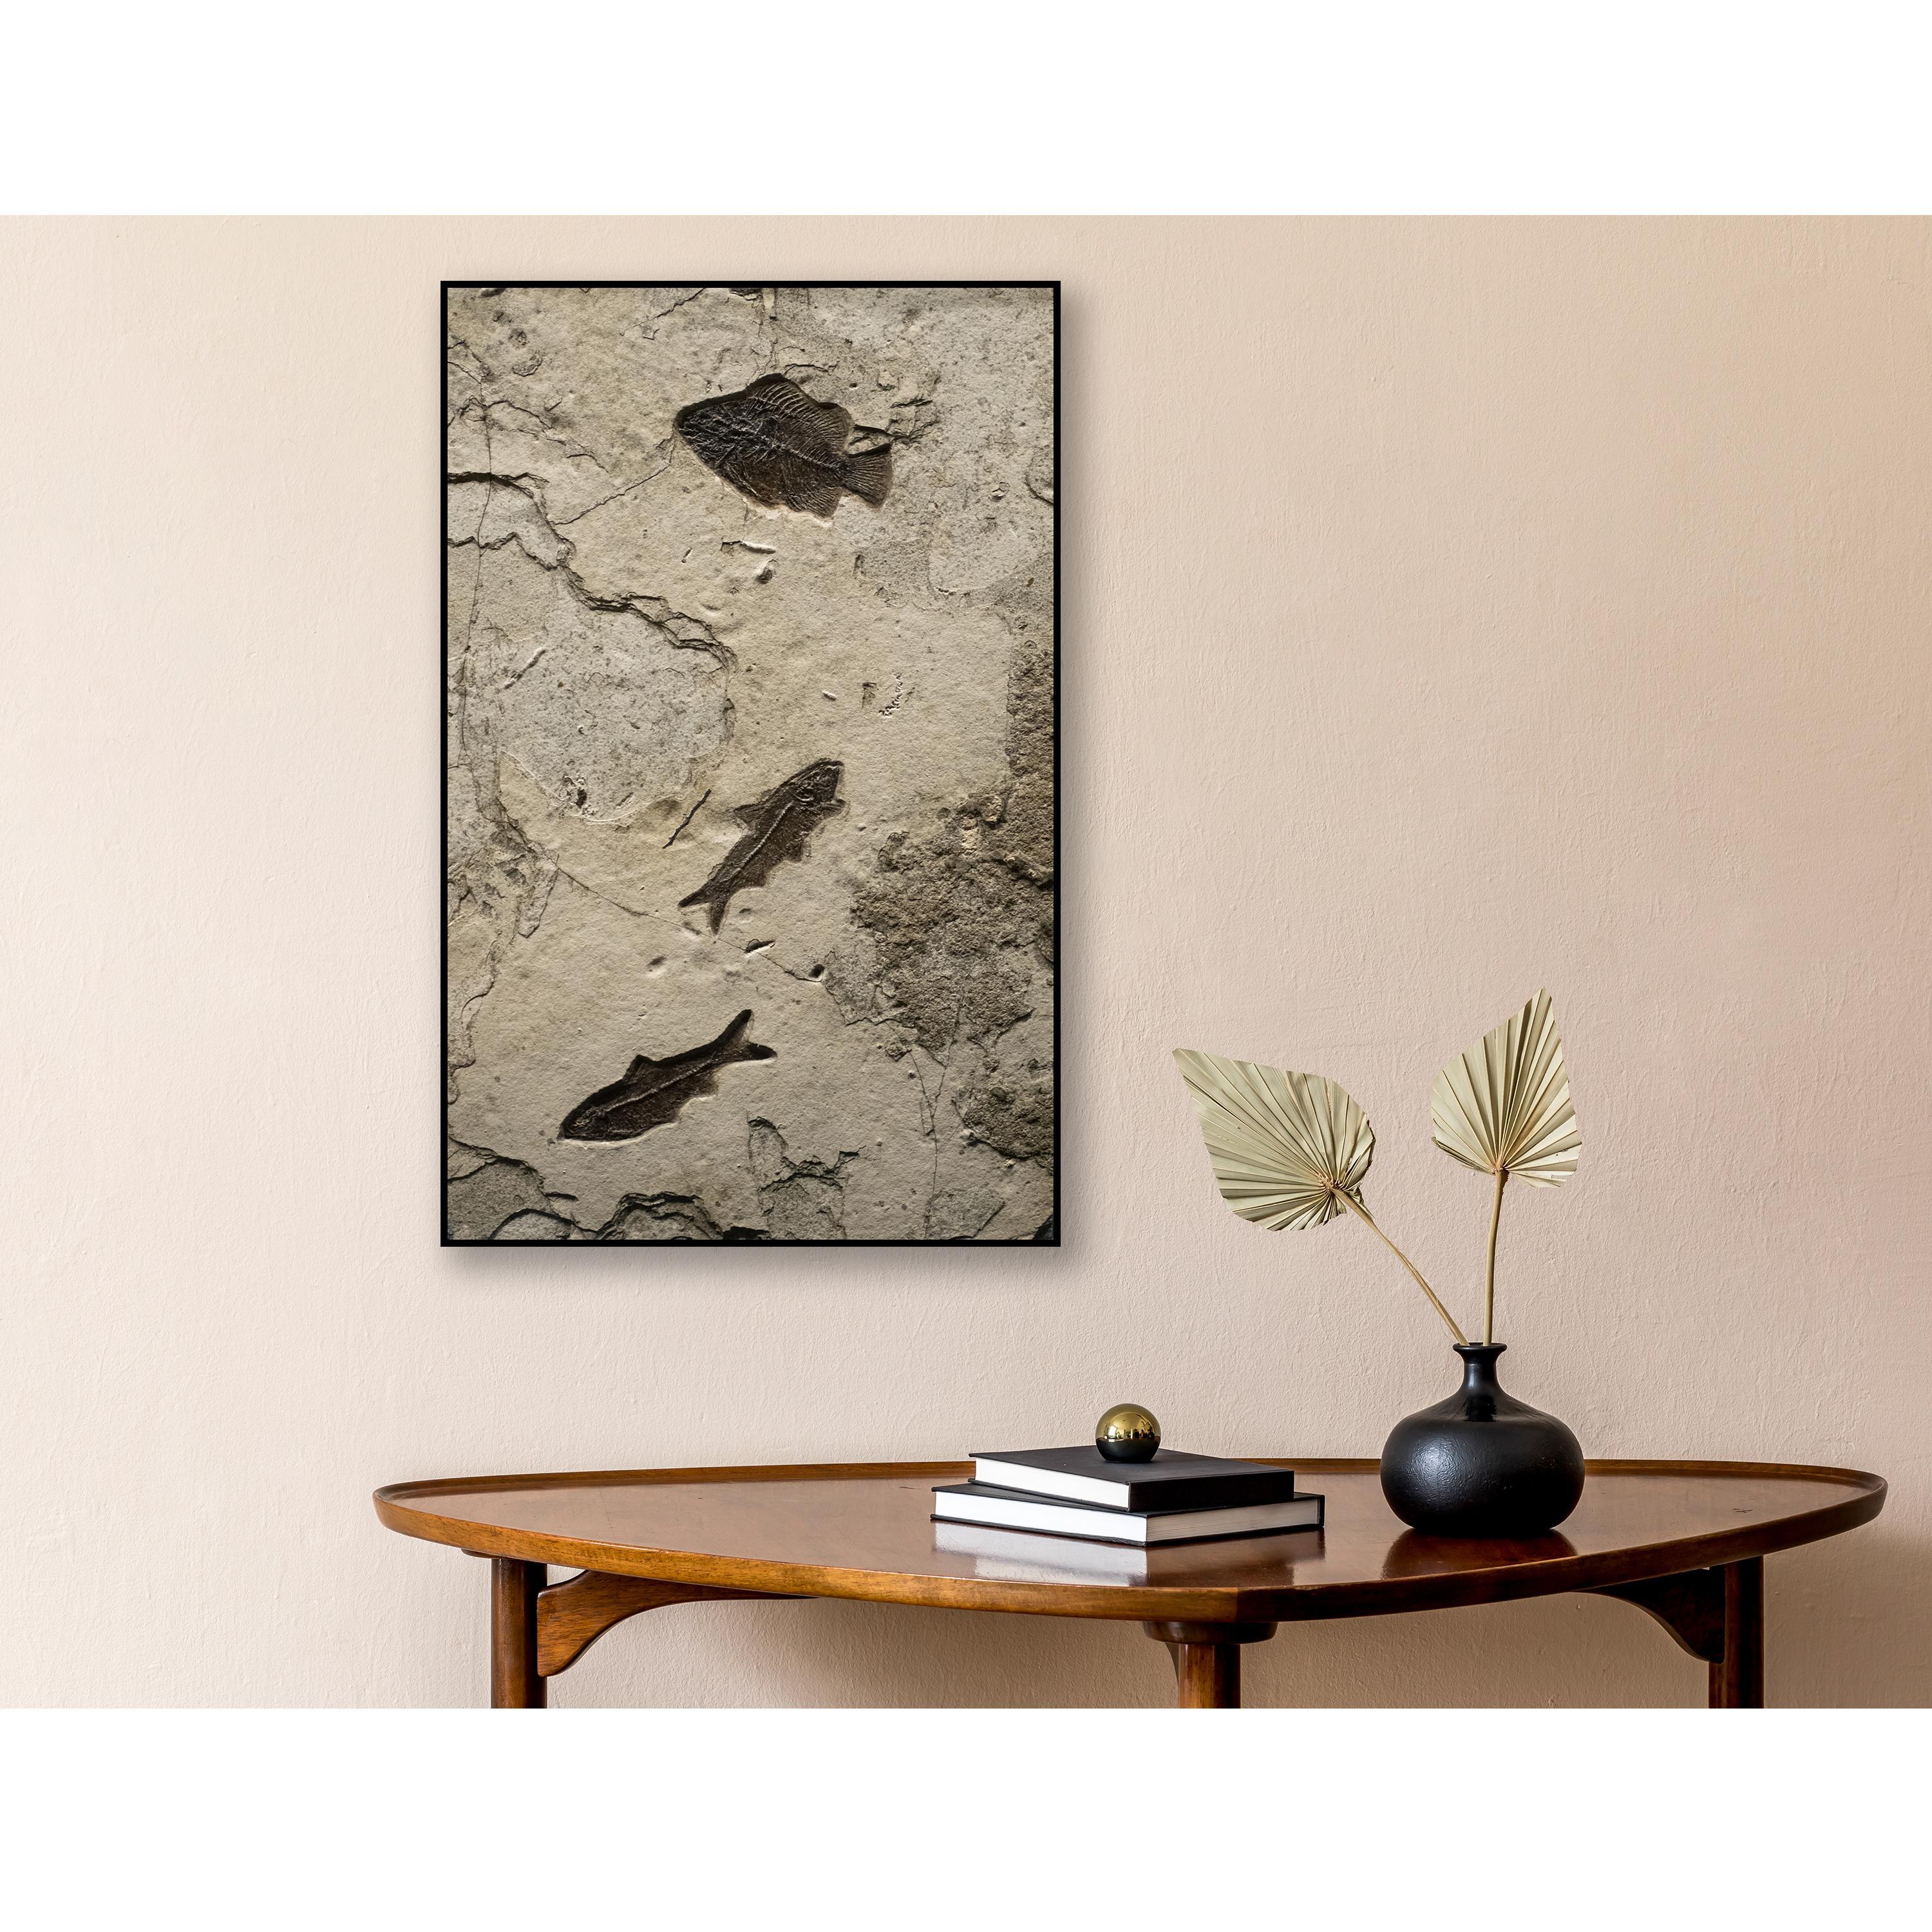 This exquisite fossil mural features a Cockerellites liops (formerly known as Priscacara) and two Knightia eocaena. These fish are Eocene era fossils dating back about 50 million years. These ancient fish are forever preserved in a textured matrix